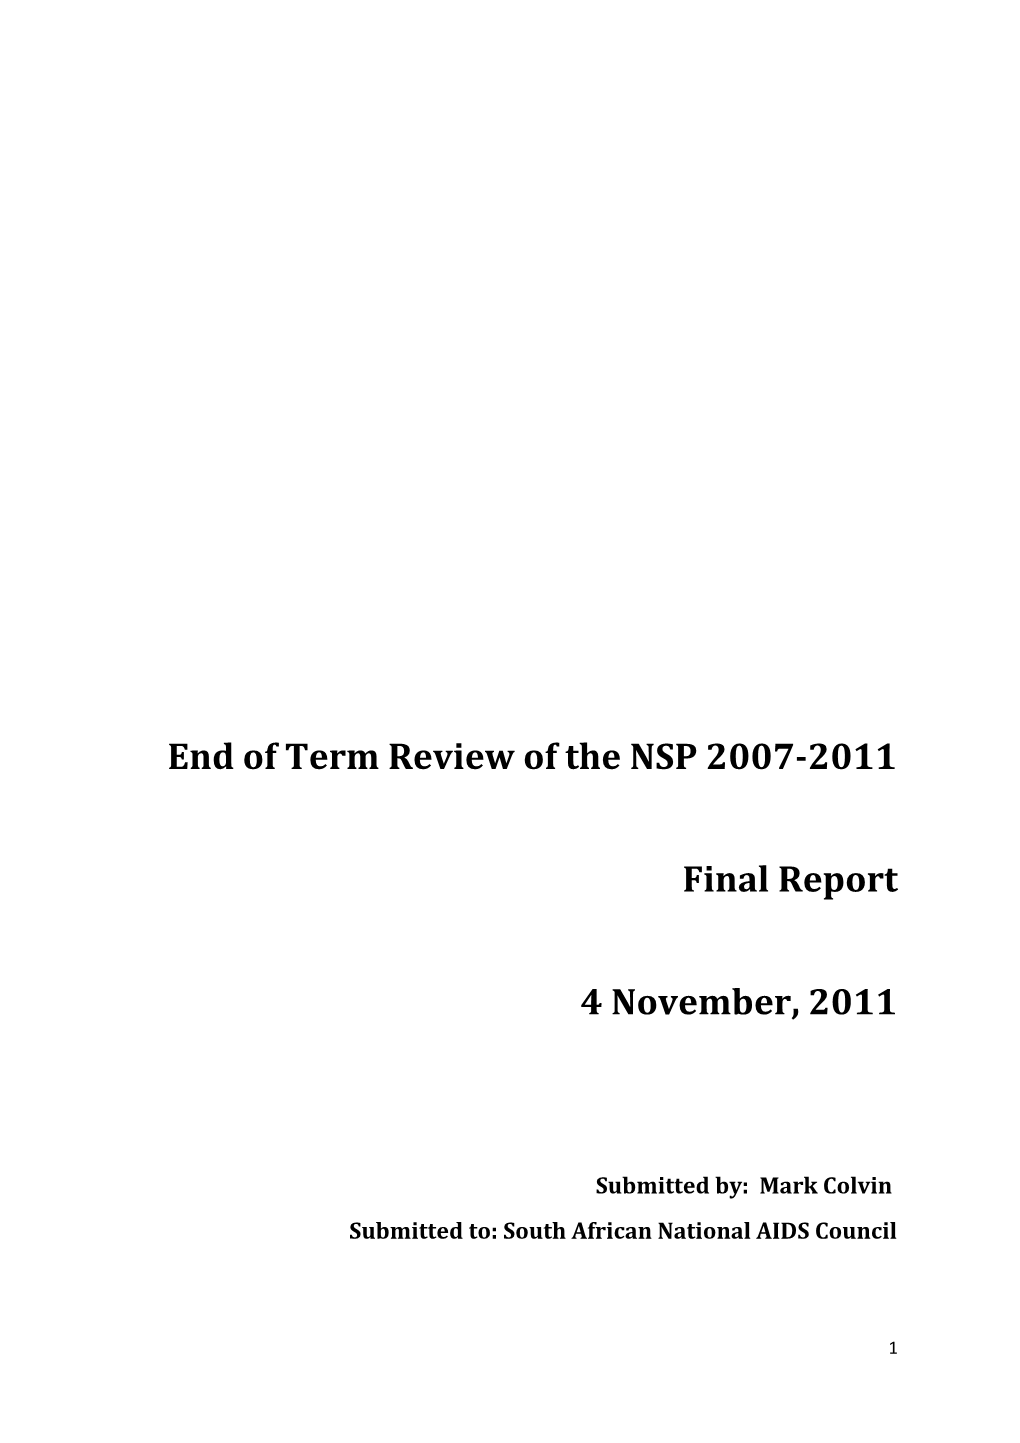 Chapter 4: Progress of the NSP 2007-2011